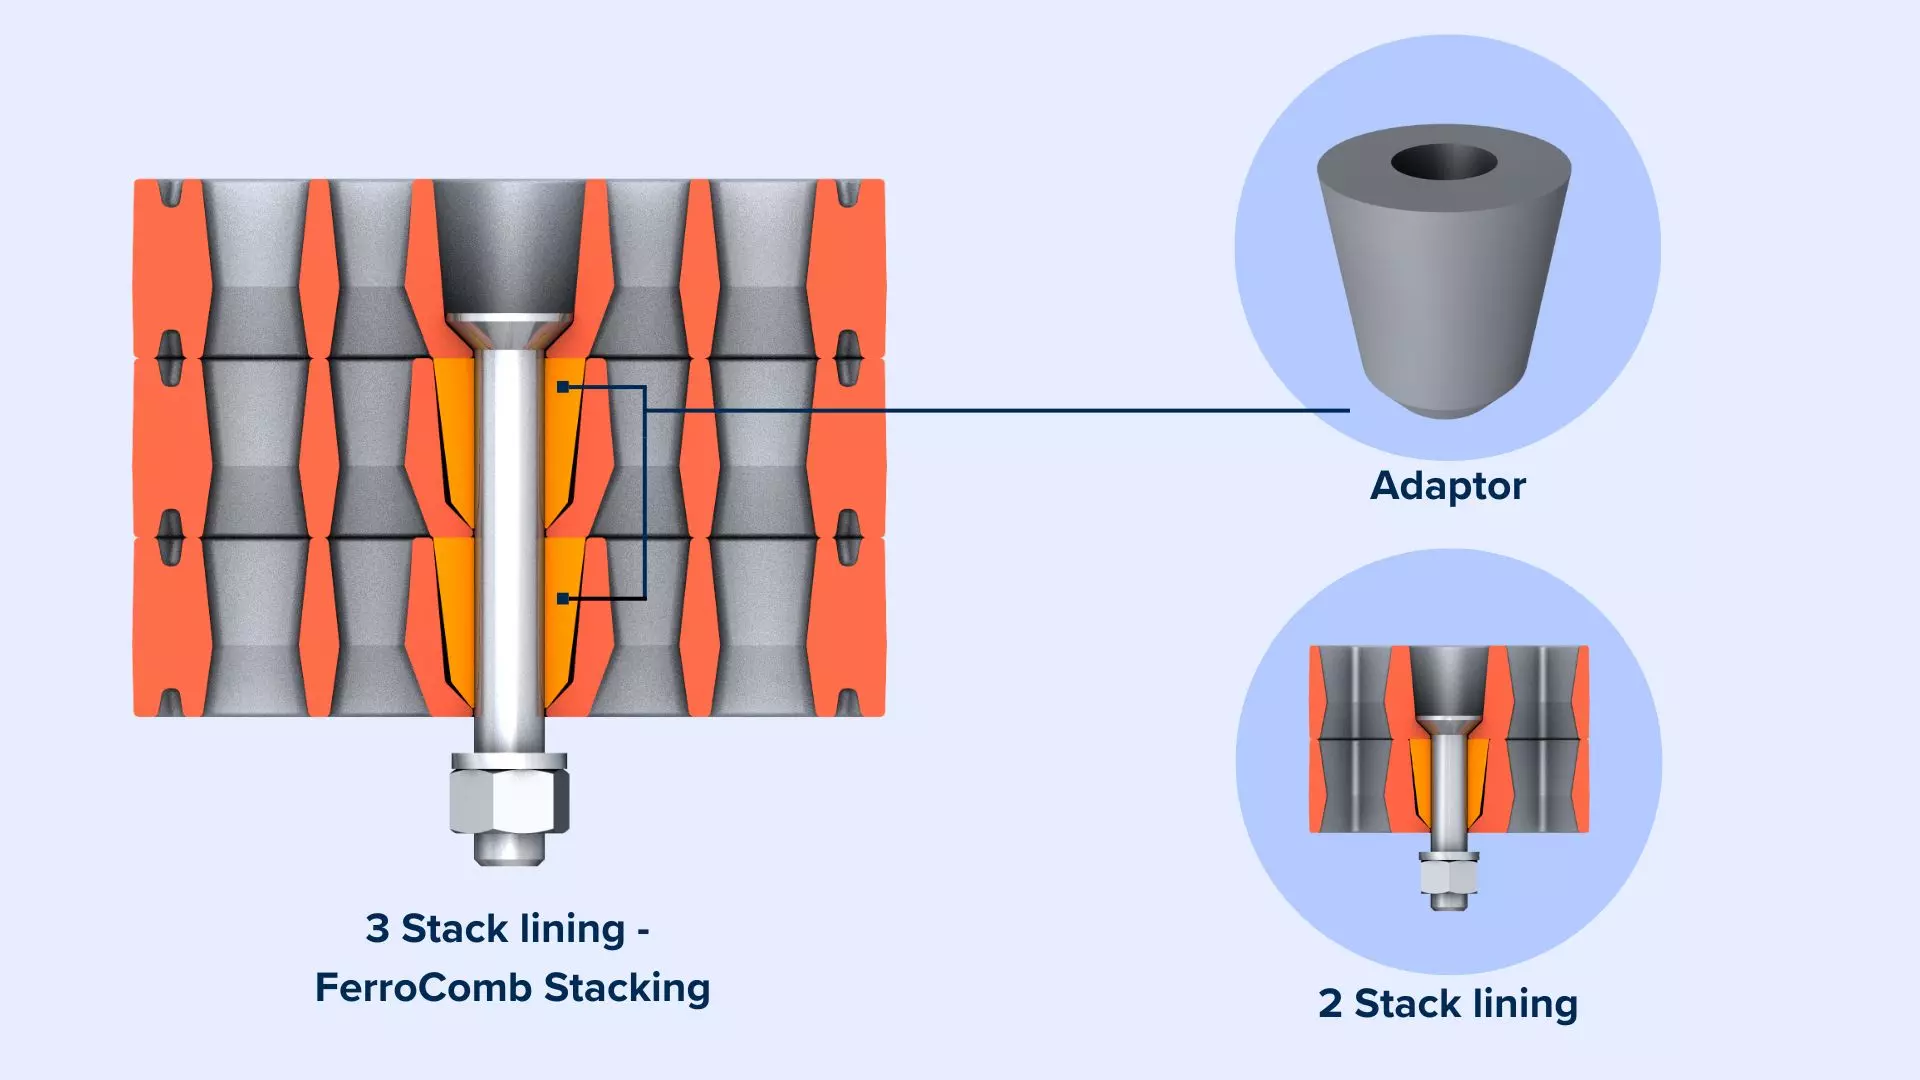 3 Stack lining - FerroComb Stacking